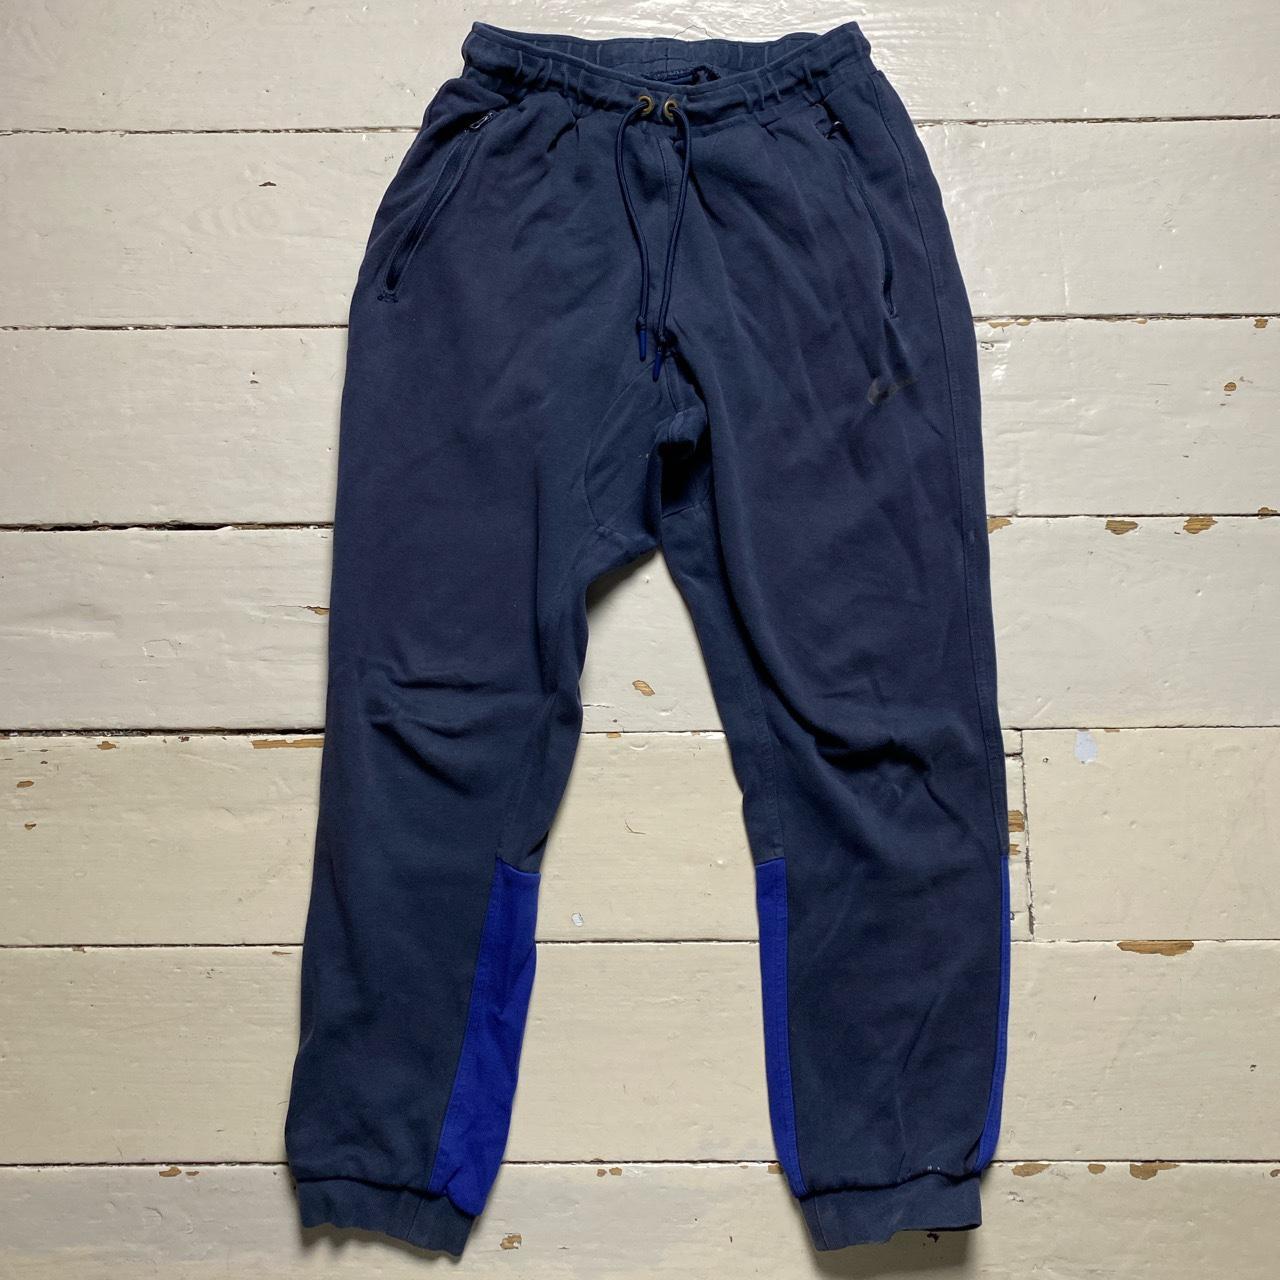 Nike Swoosh Navy and Black Joggers